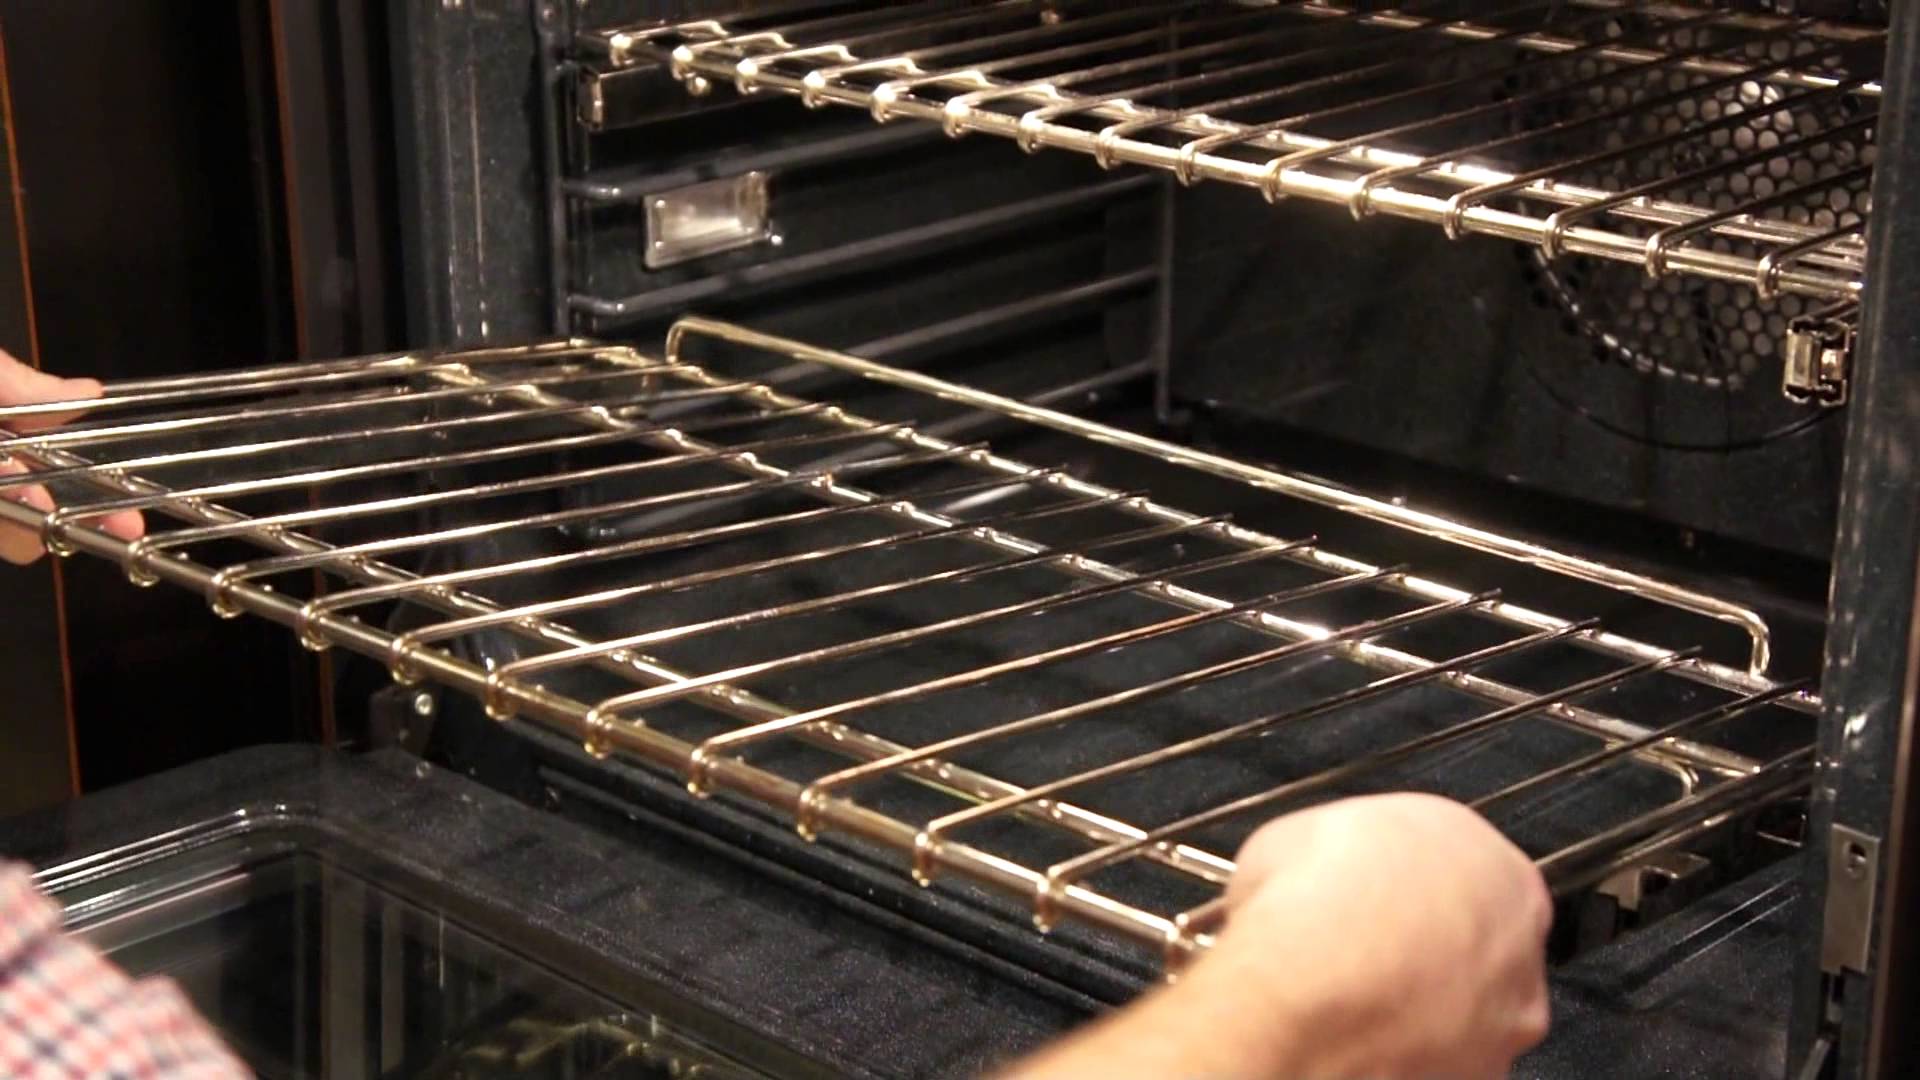 Top 5 Ways to Clean Oven Trays